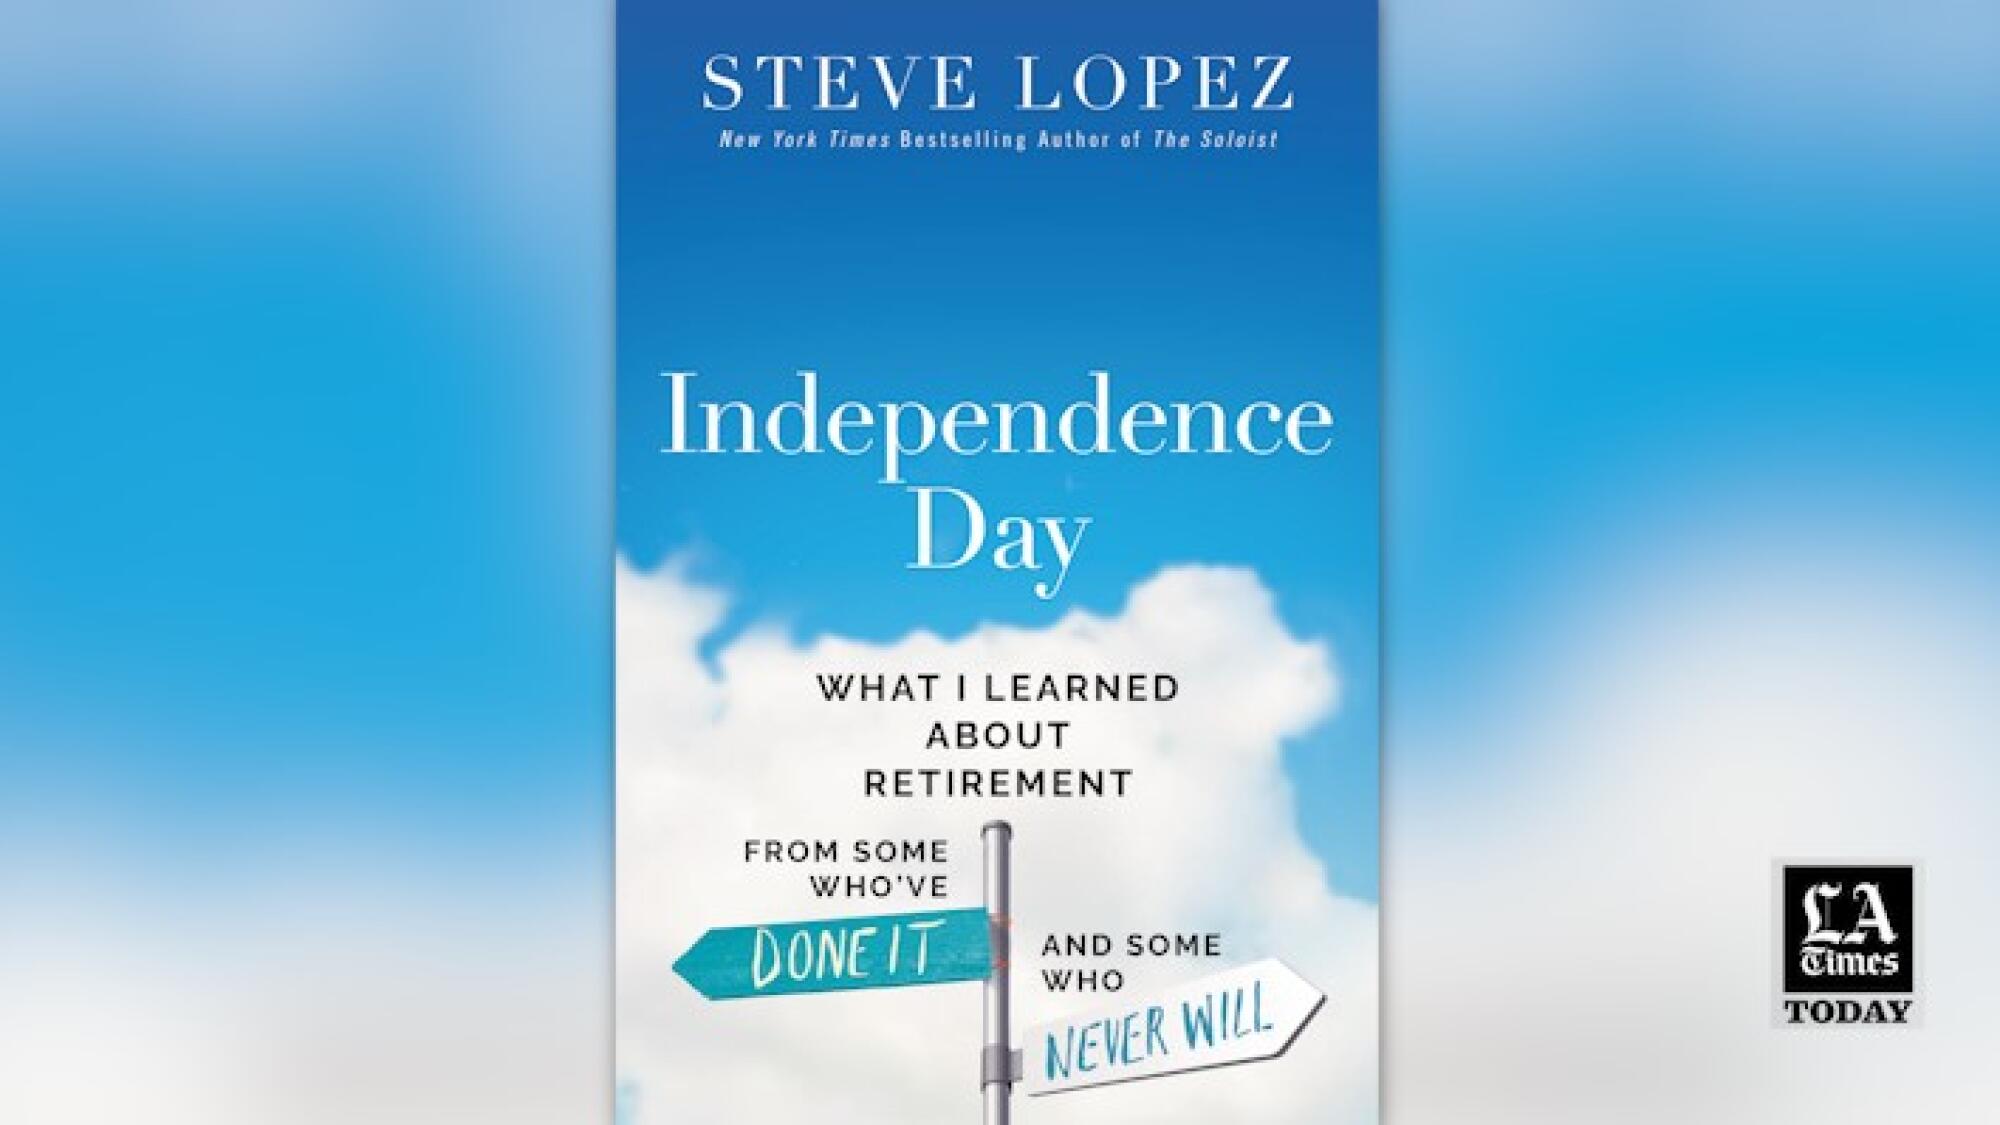 Independence Day: What I Learned About Retirement from Some Who've Done It  and Some Who Never Will